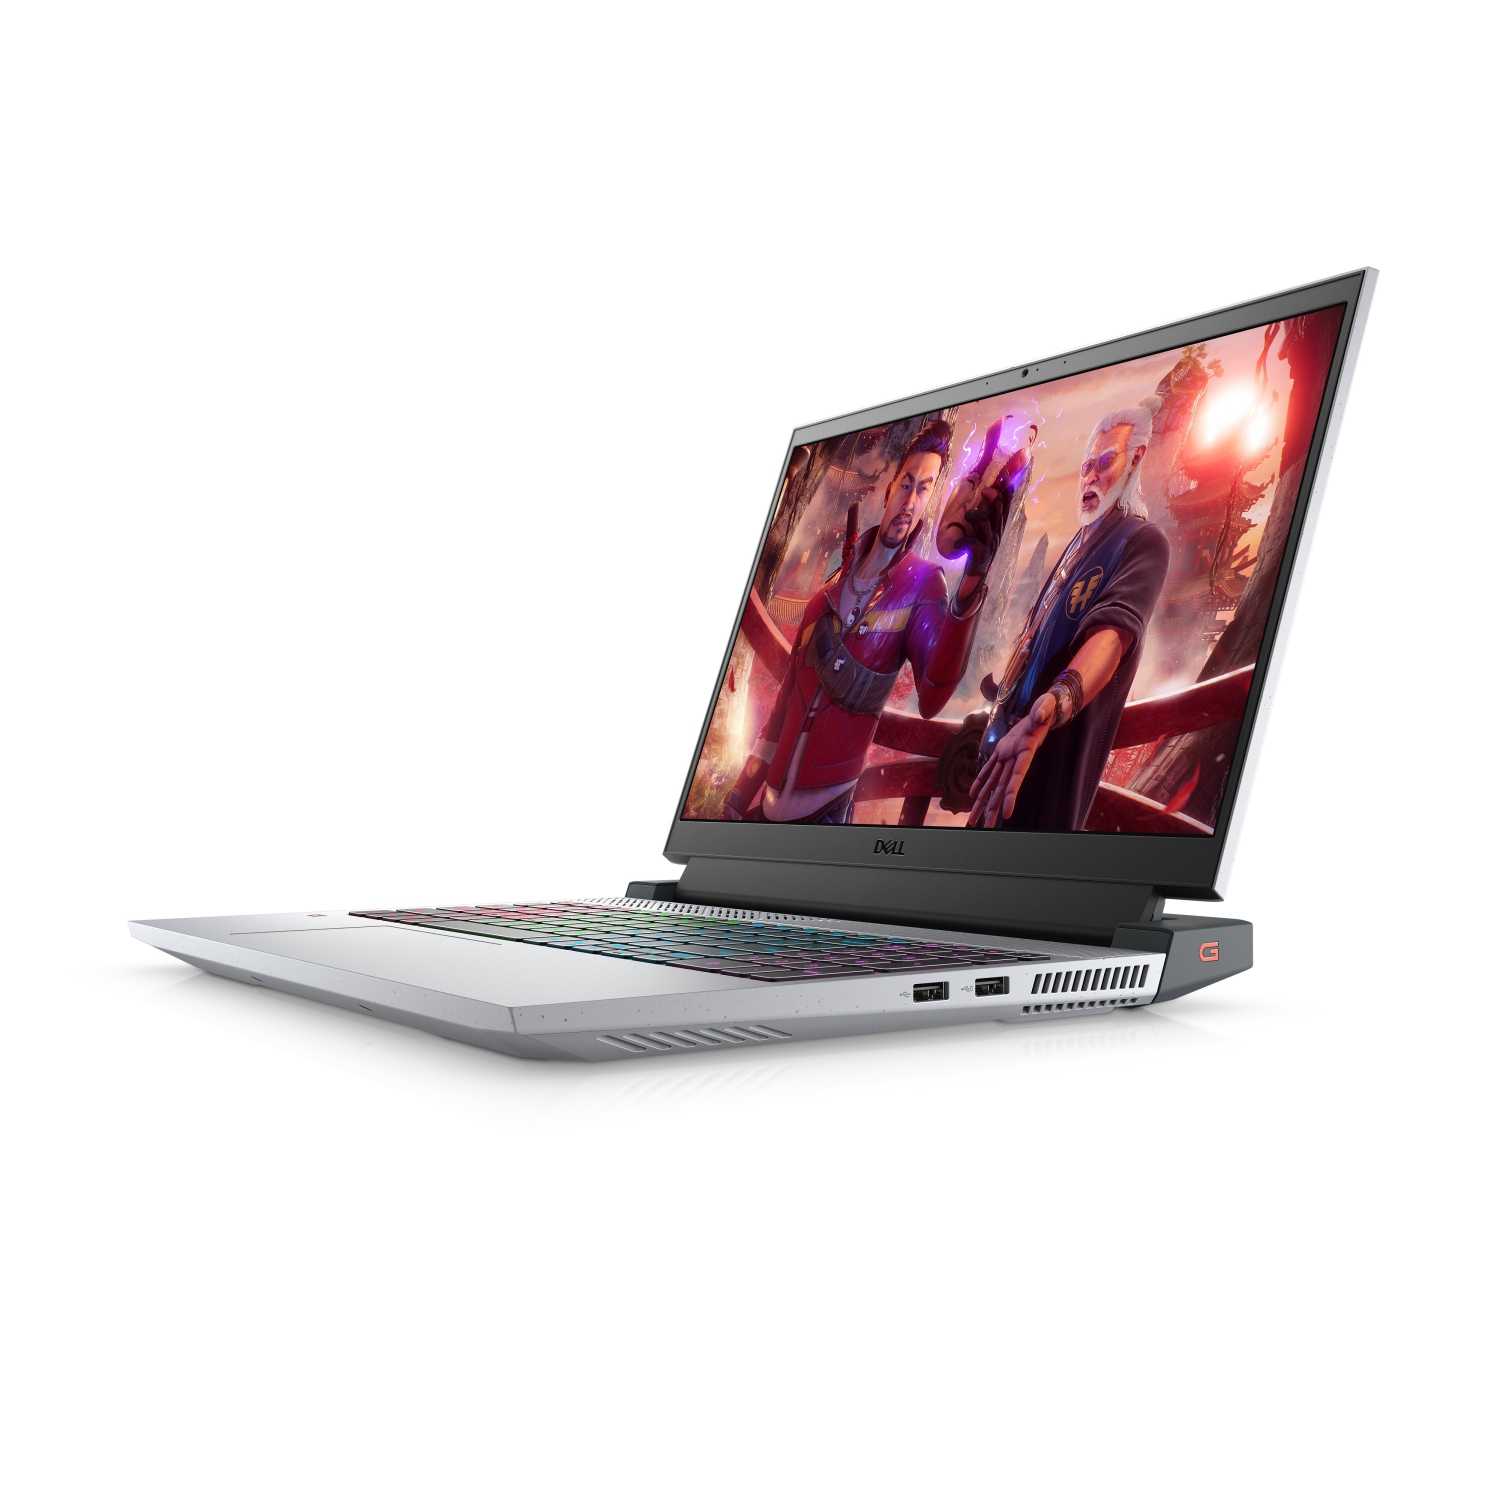 Refurbished (Excellent) - Dell G15 5515 Gaming Laptop (2021) | 15.6" FHD | Core Ryzen 5 - 512GB SSD - 16GB RAM - RTX 3050 | 6 Cores @ 4.2 GHz Certified Refurbished